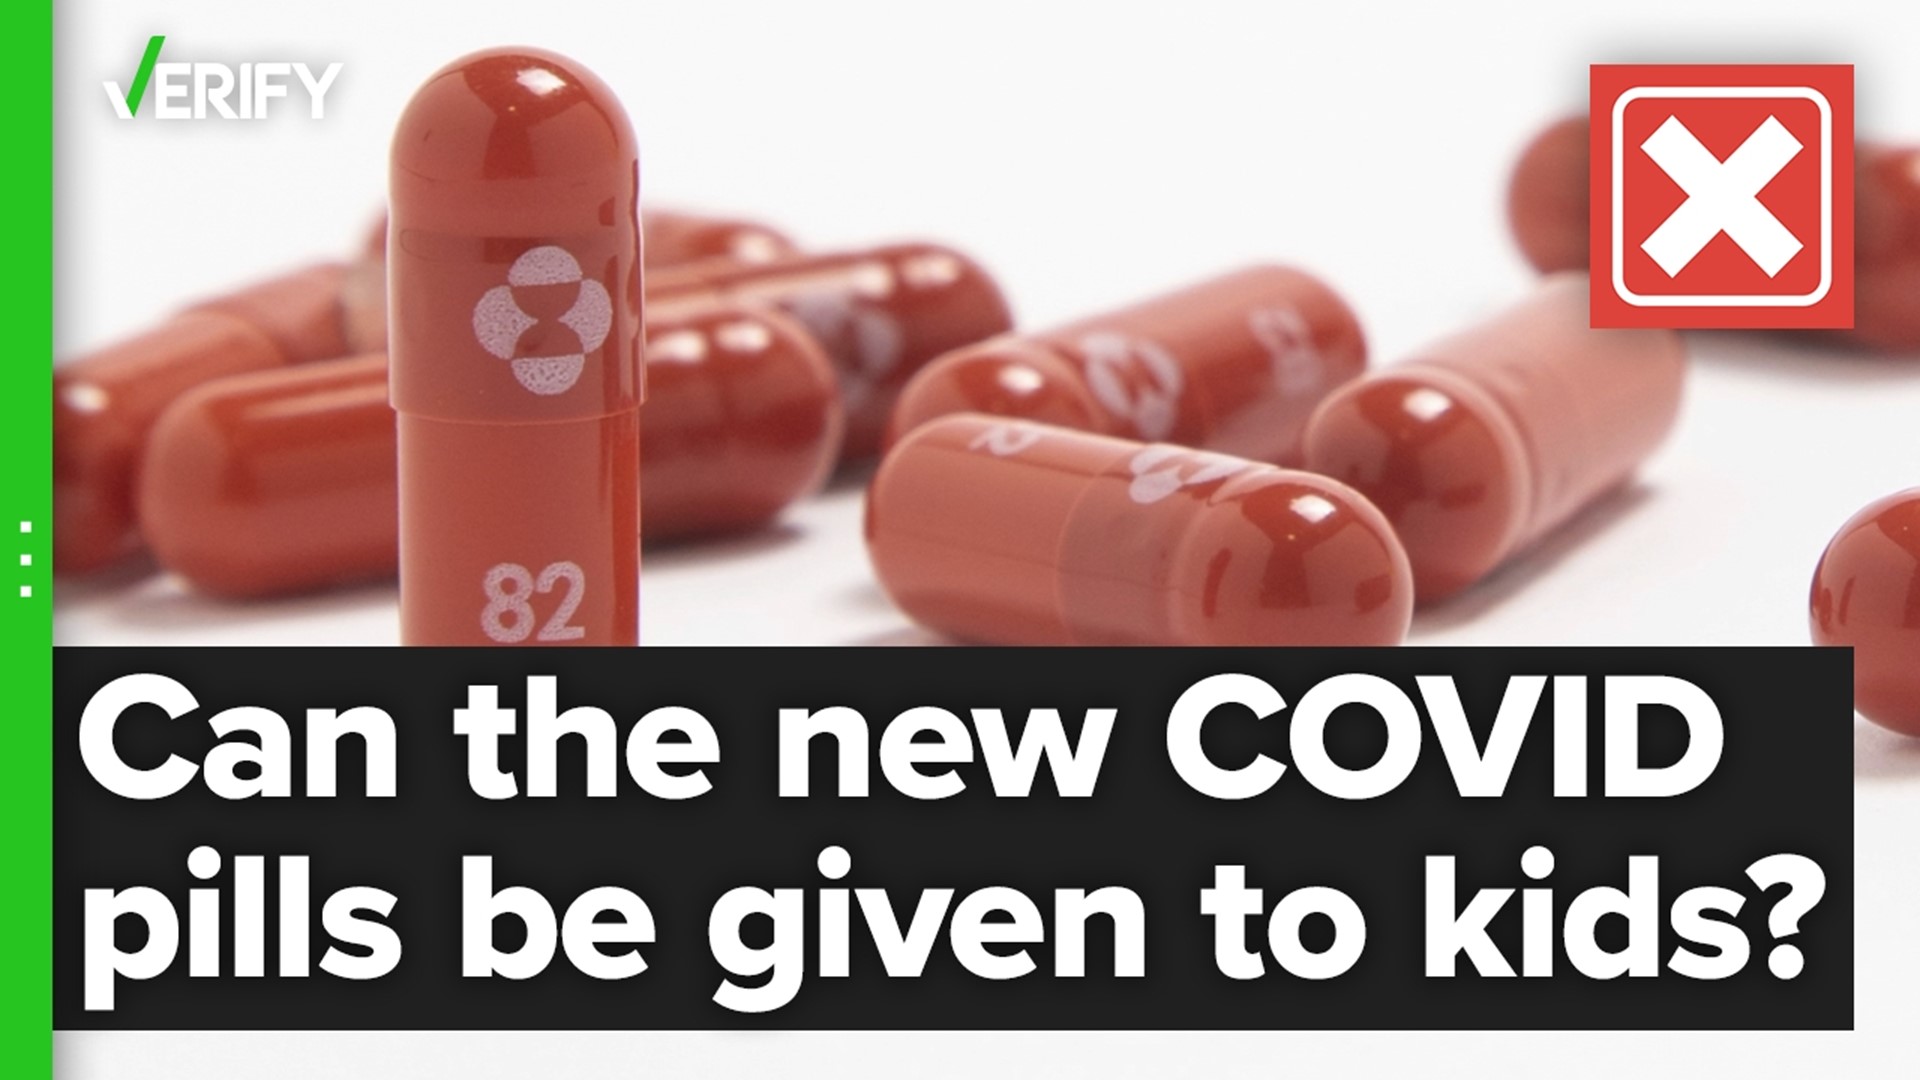 Can Merck or Pfizers’ COVID pills be given to children? The VERIFY team confirms this is false.